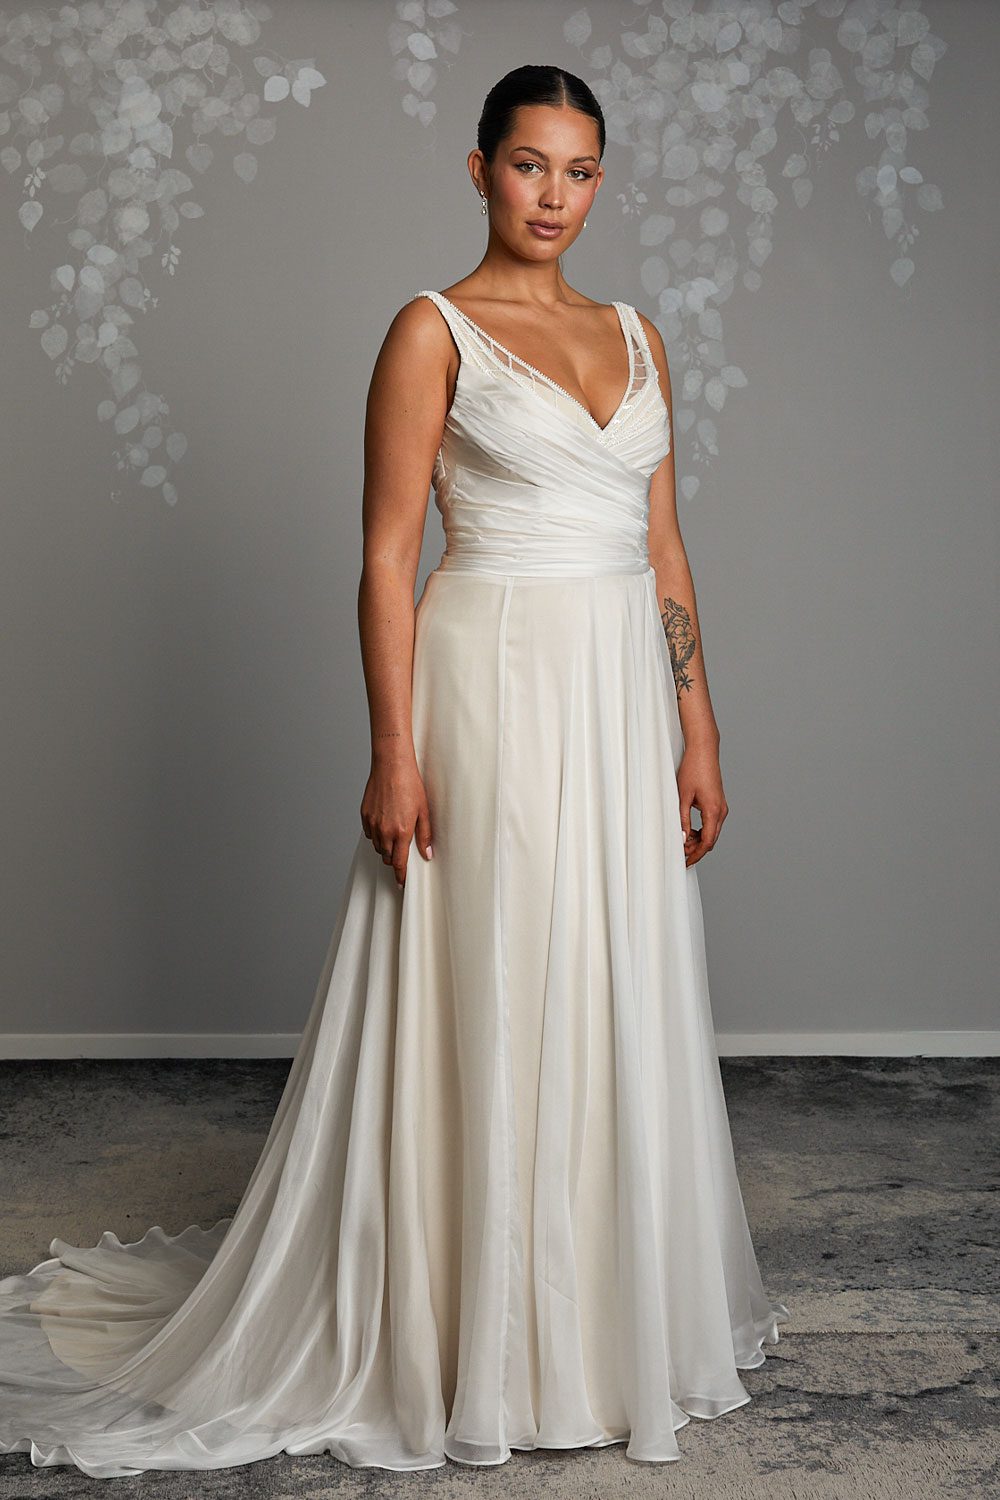 Tihana - Dreamy silk chiffon and intricately beaded, lined lace wedding gown from the Curve collection. A-Line, Beaded, Silk Chiffon, V-Neck. Vinka Design, NZ